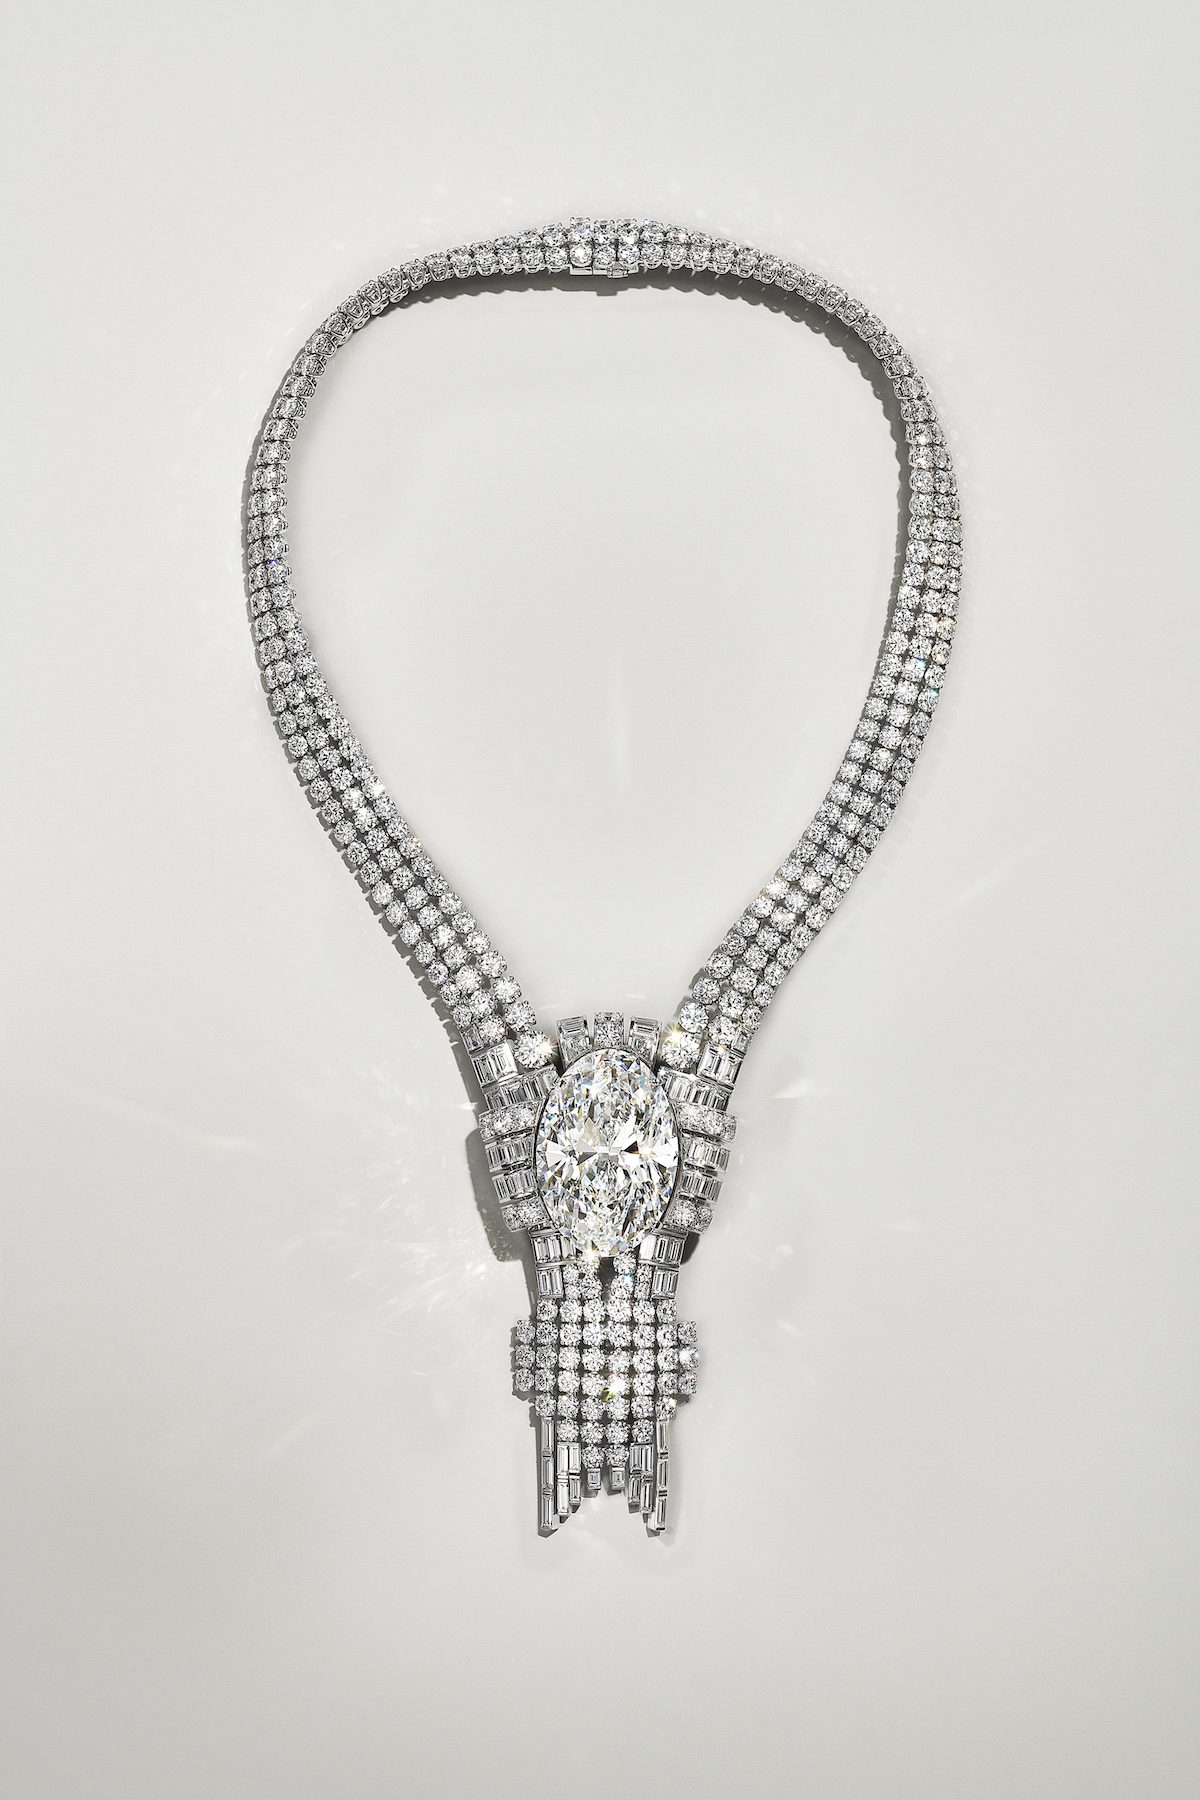 Diamond Necklace Gift: Over 82,243 Royalty-Free Licensable Stock Photos |  Shutterstock